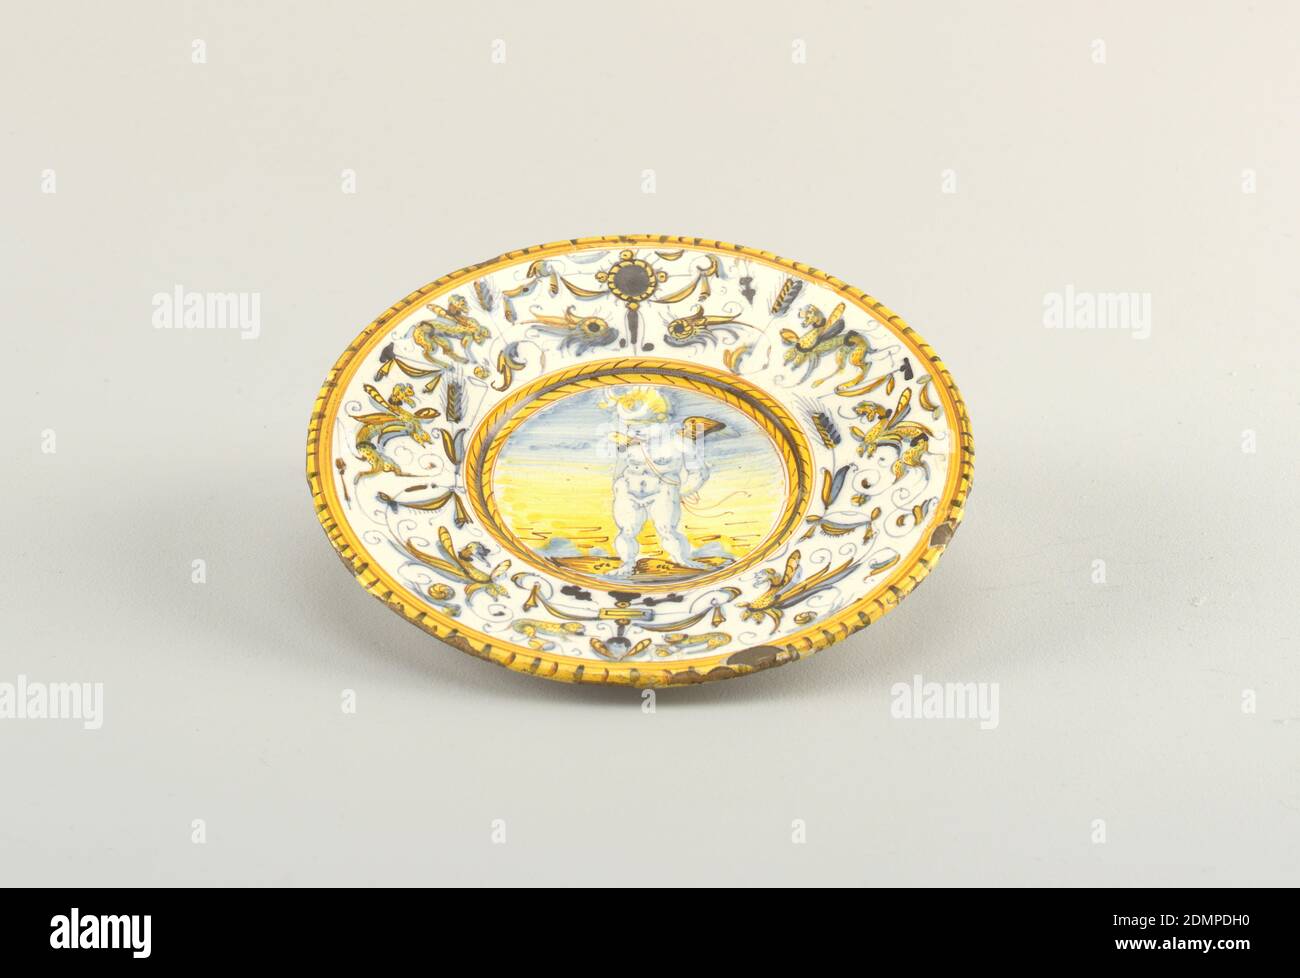 Amorino, Tin-glazed earthenware (maiolica), Plate with image of blindfolded Cupid at center. Rim decorated with grotesques. Yellow dash border., possibly Urbino, Italy, possibly ca. 1600, ceramics, Decorative Arts, Plate, Plate Stock Photo